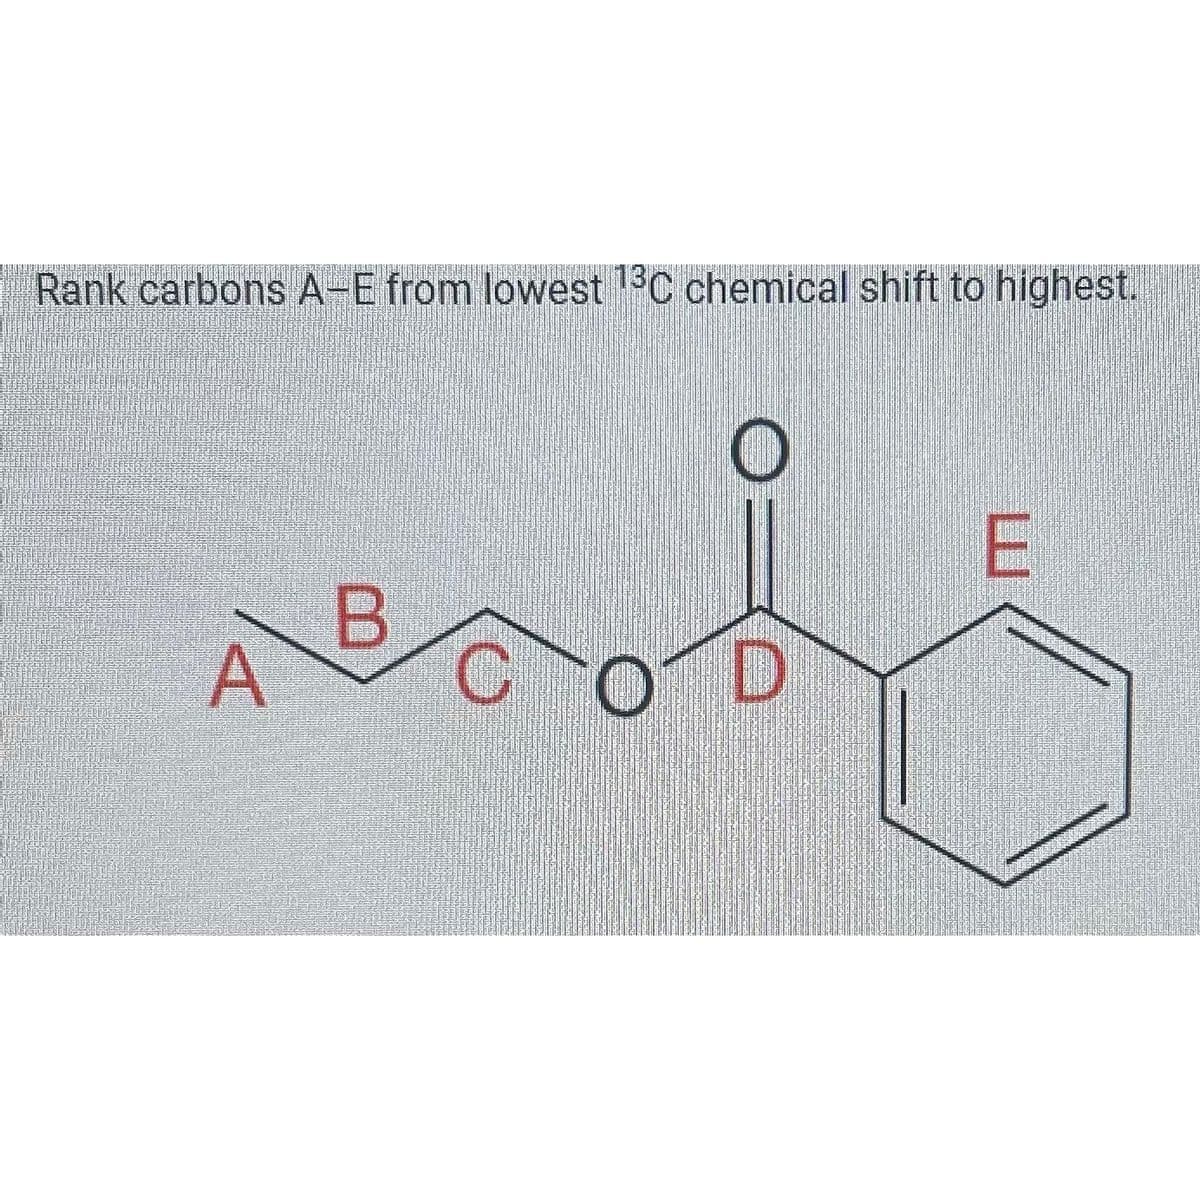 Rank carbons A-E from lowest 1¹3C chemical shift to highest.
A
B
E